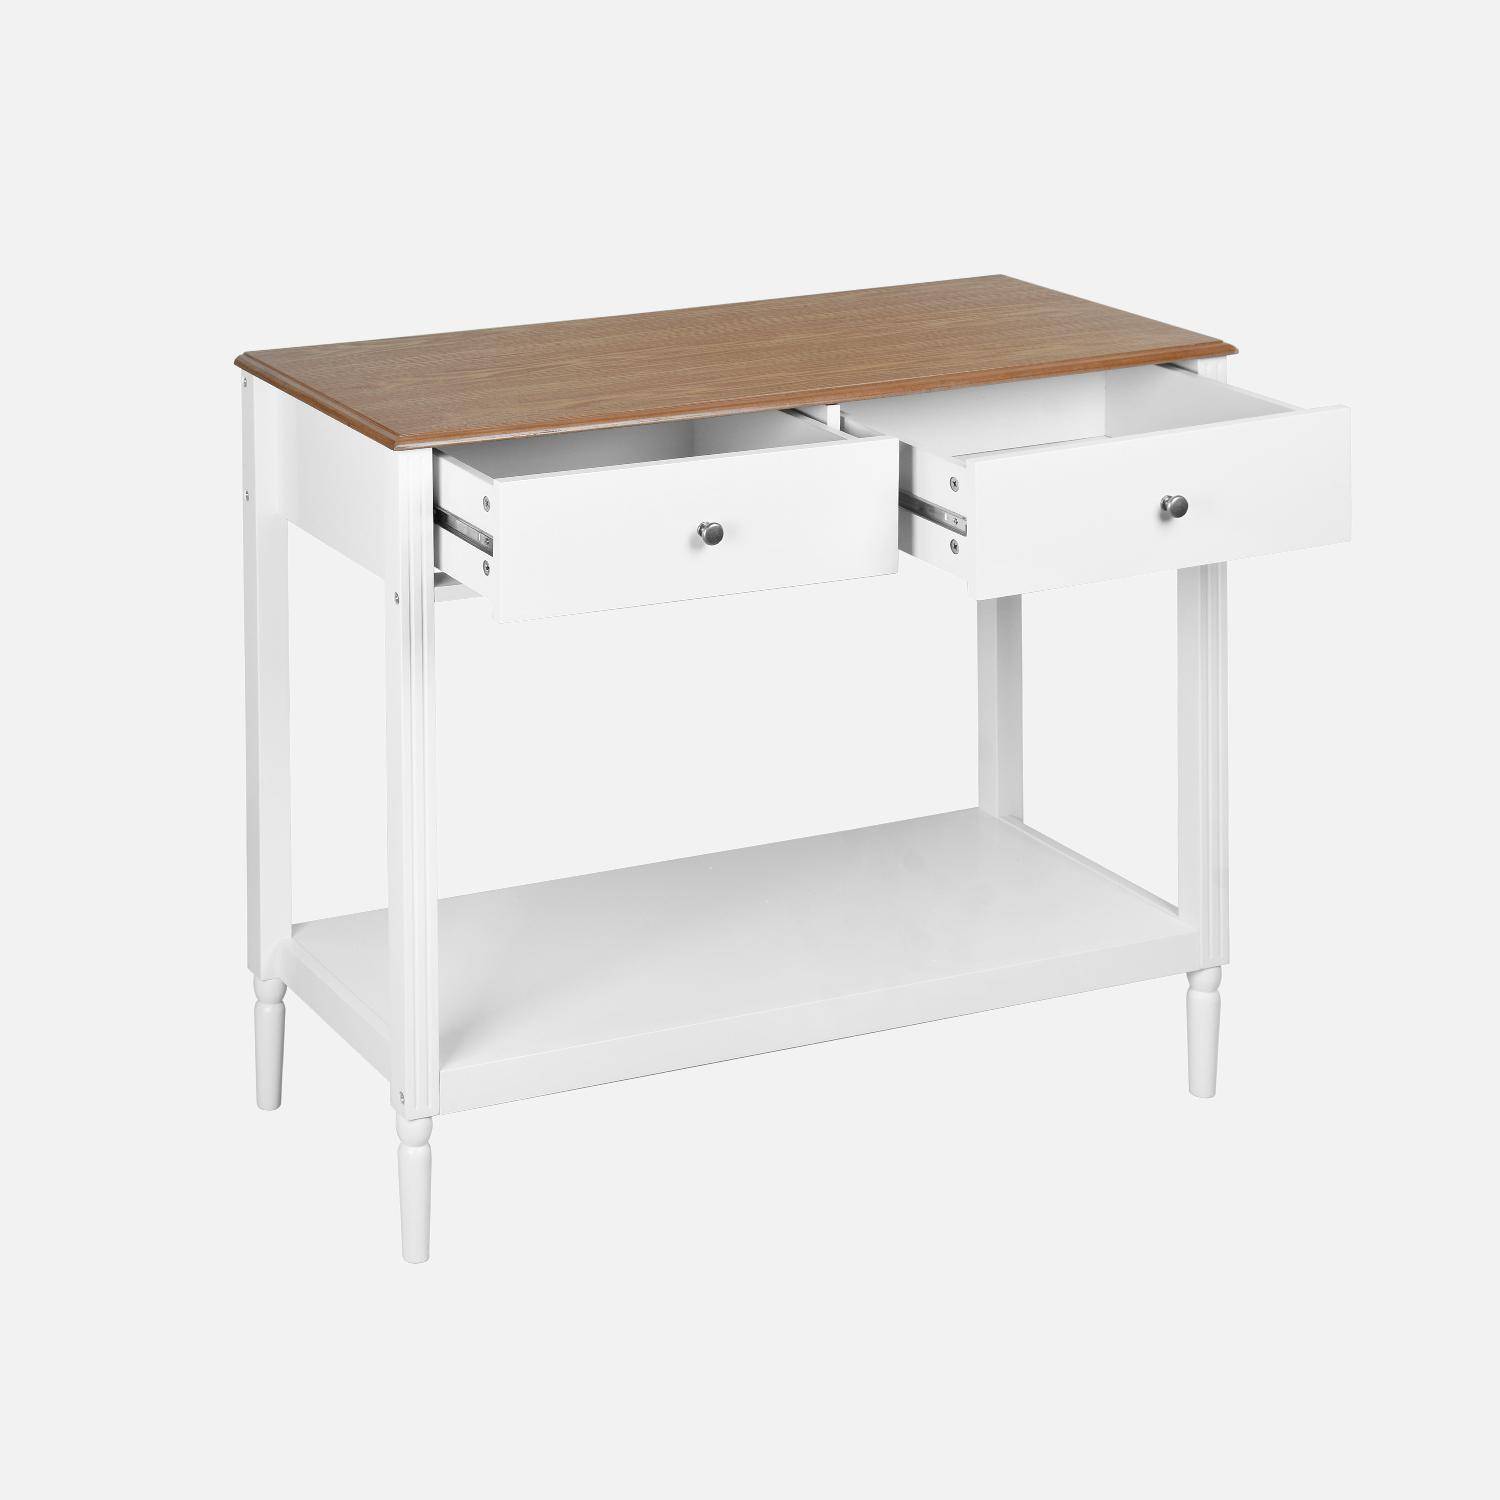 Console table with pinewood legs, 110x40x85cm, Celeste, White Photo5